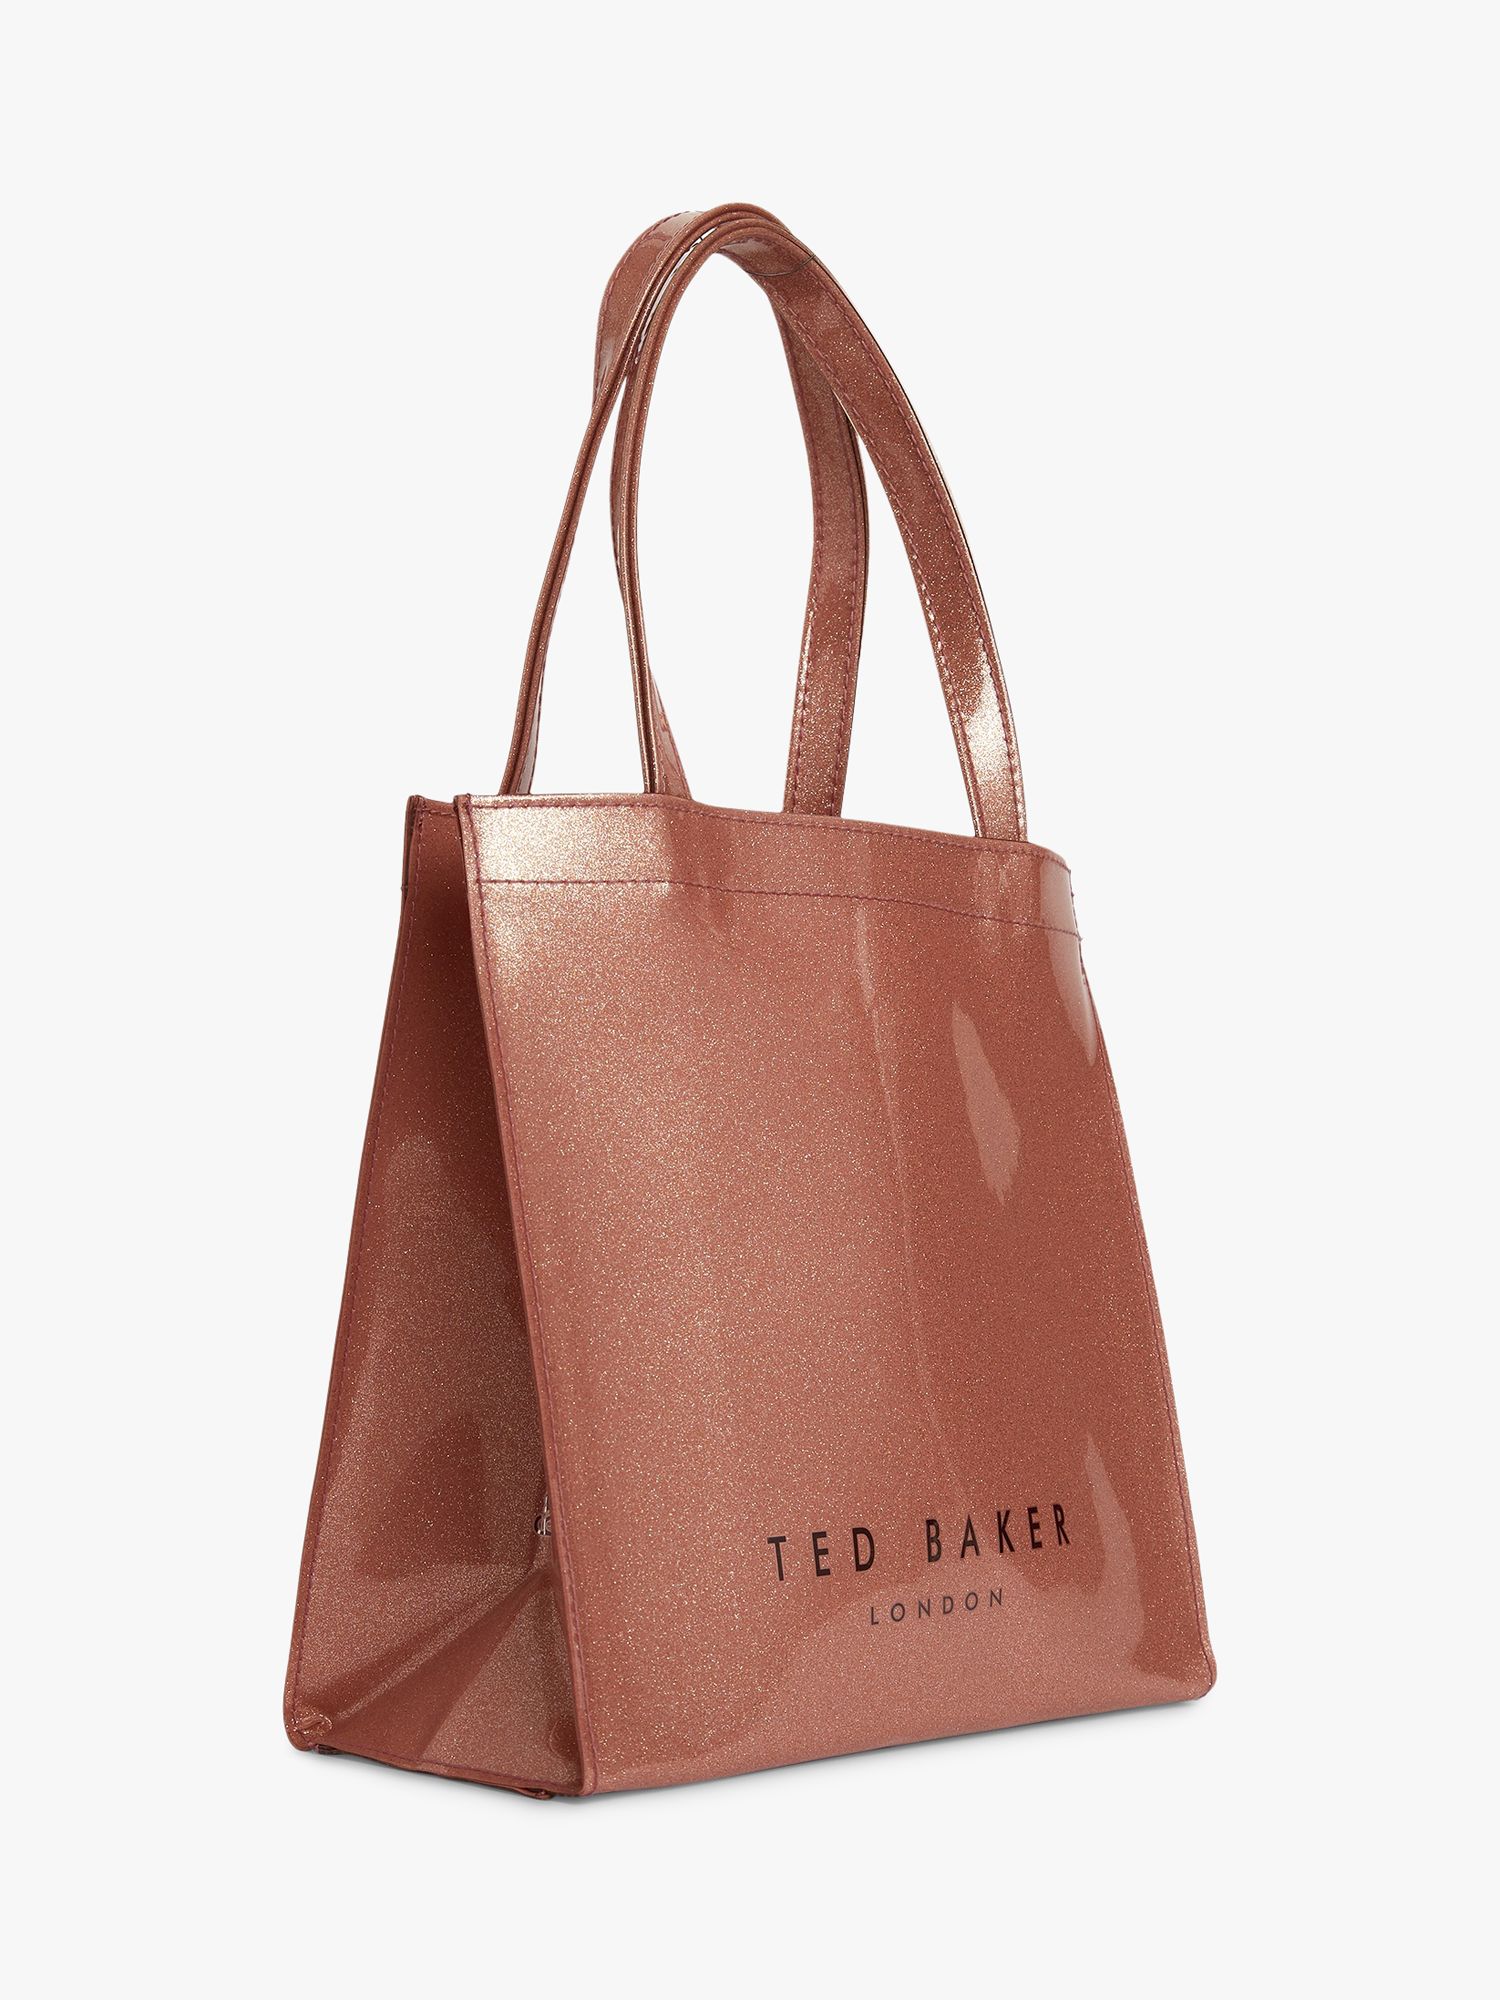 ted baker bags online